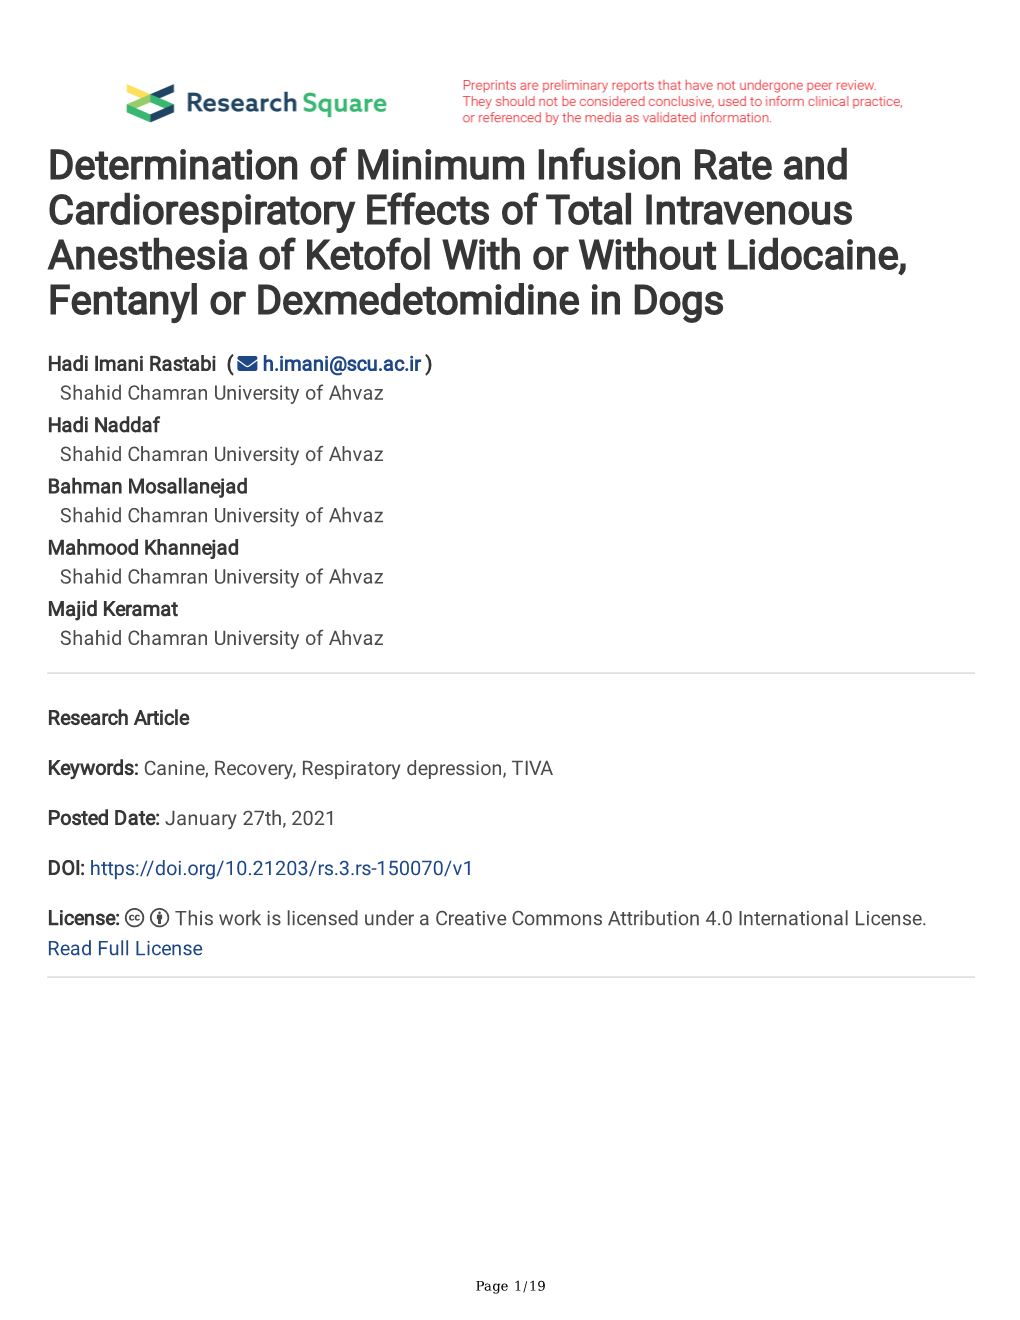 Determination of Minimum Infusion Rate and Cardiorespiratory Effects